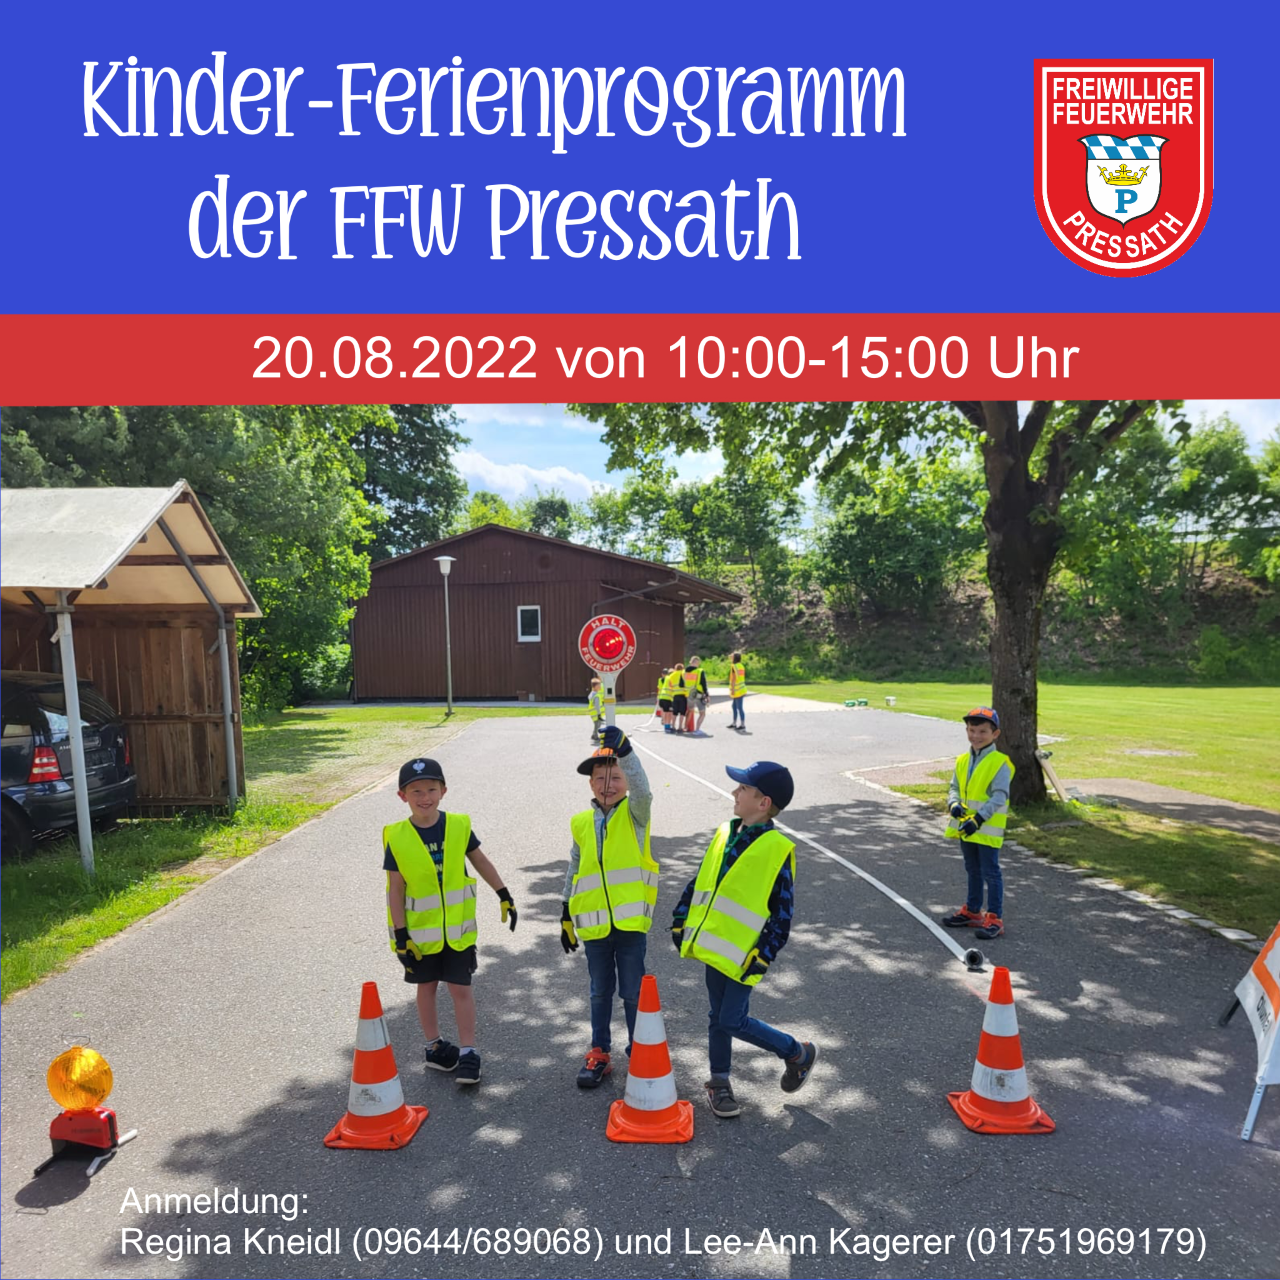 You are currently viewing Kinderferienprogramm